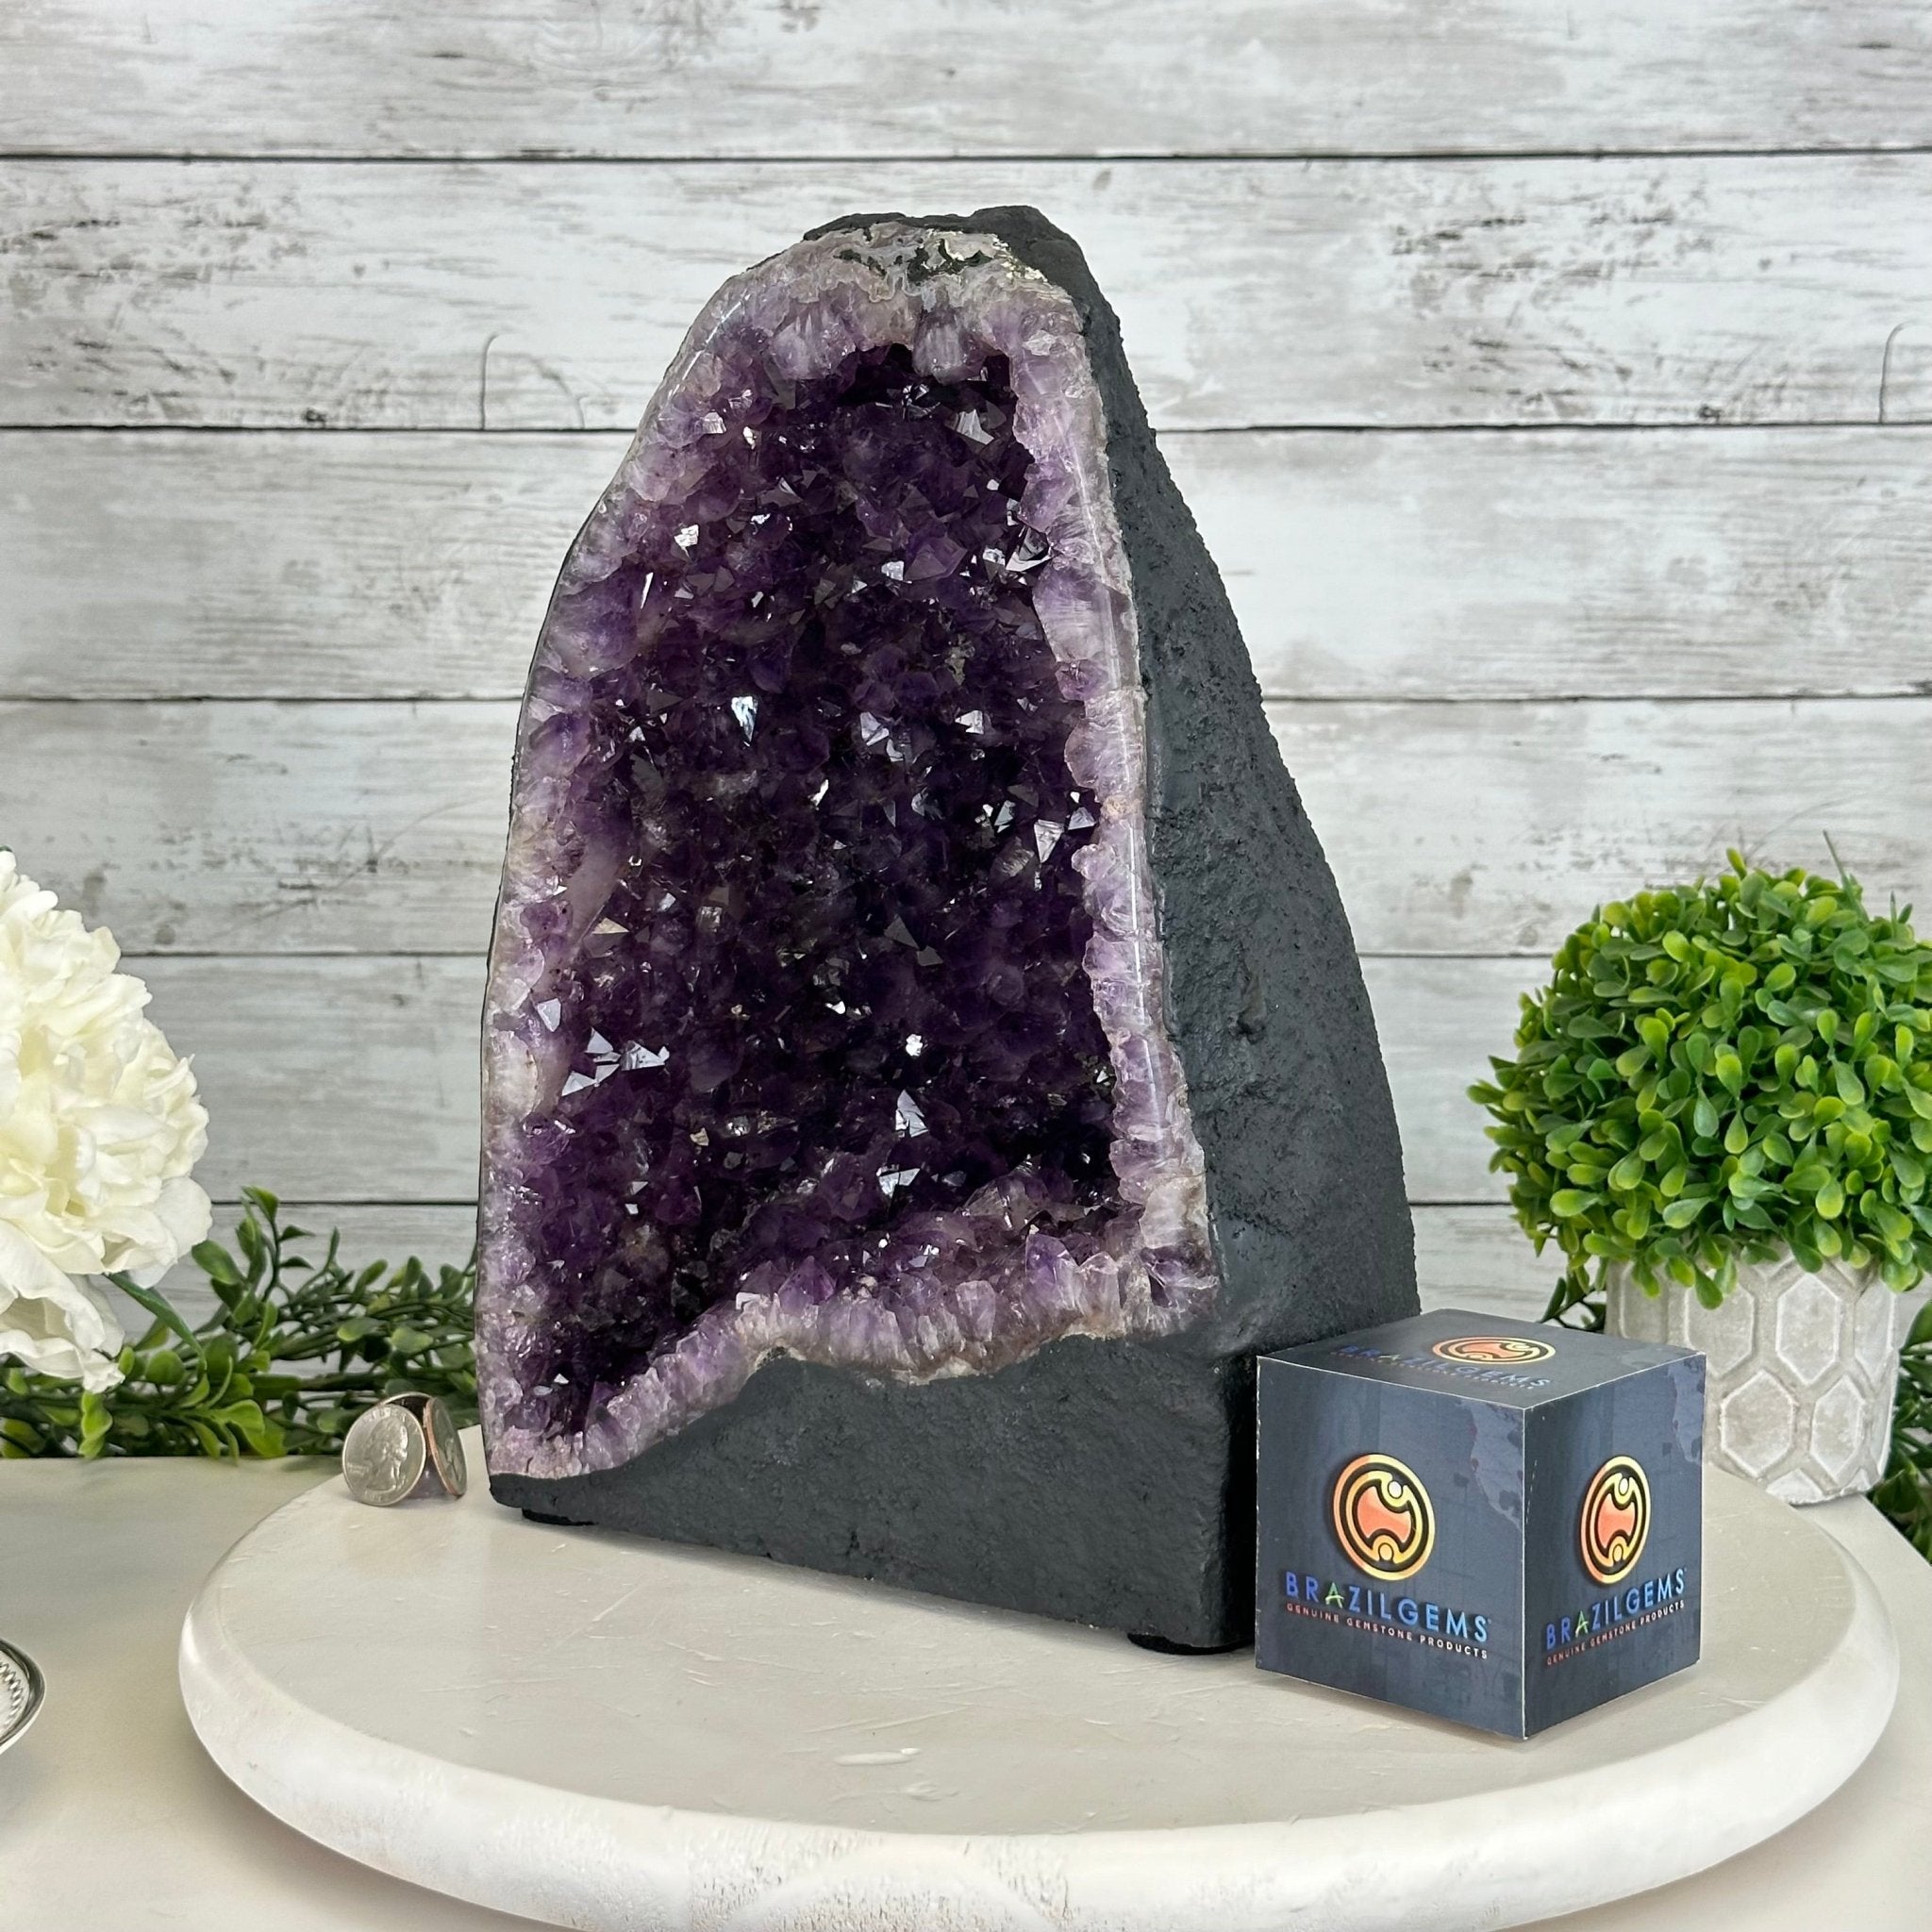 Quality Brazilian Amethyst Cathedral, 17.6 lbs & 11.8" Tall, #5601 - 1376 - Brazil GemsBrazil GemsQuality Brazilian Amethyst Cathedral, 17.6 lbs & 11.8" Tall, #5601 - 1376Cathedrals5601 - 1376